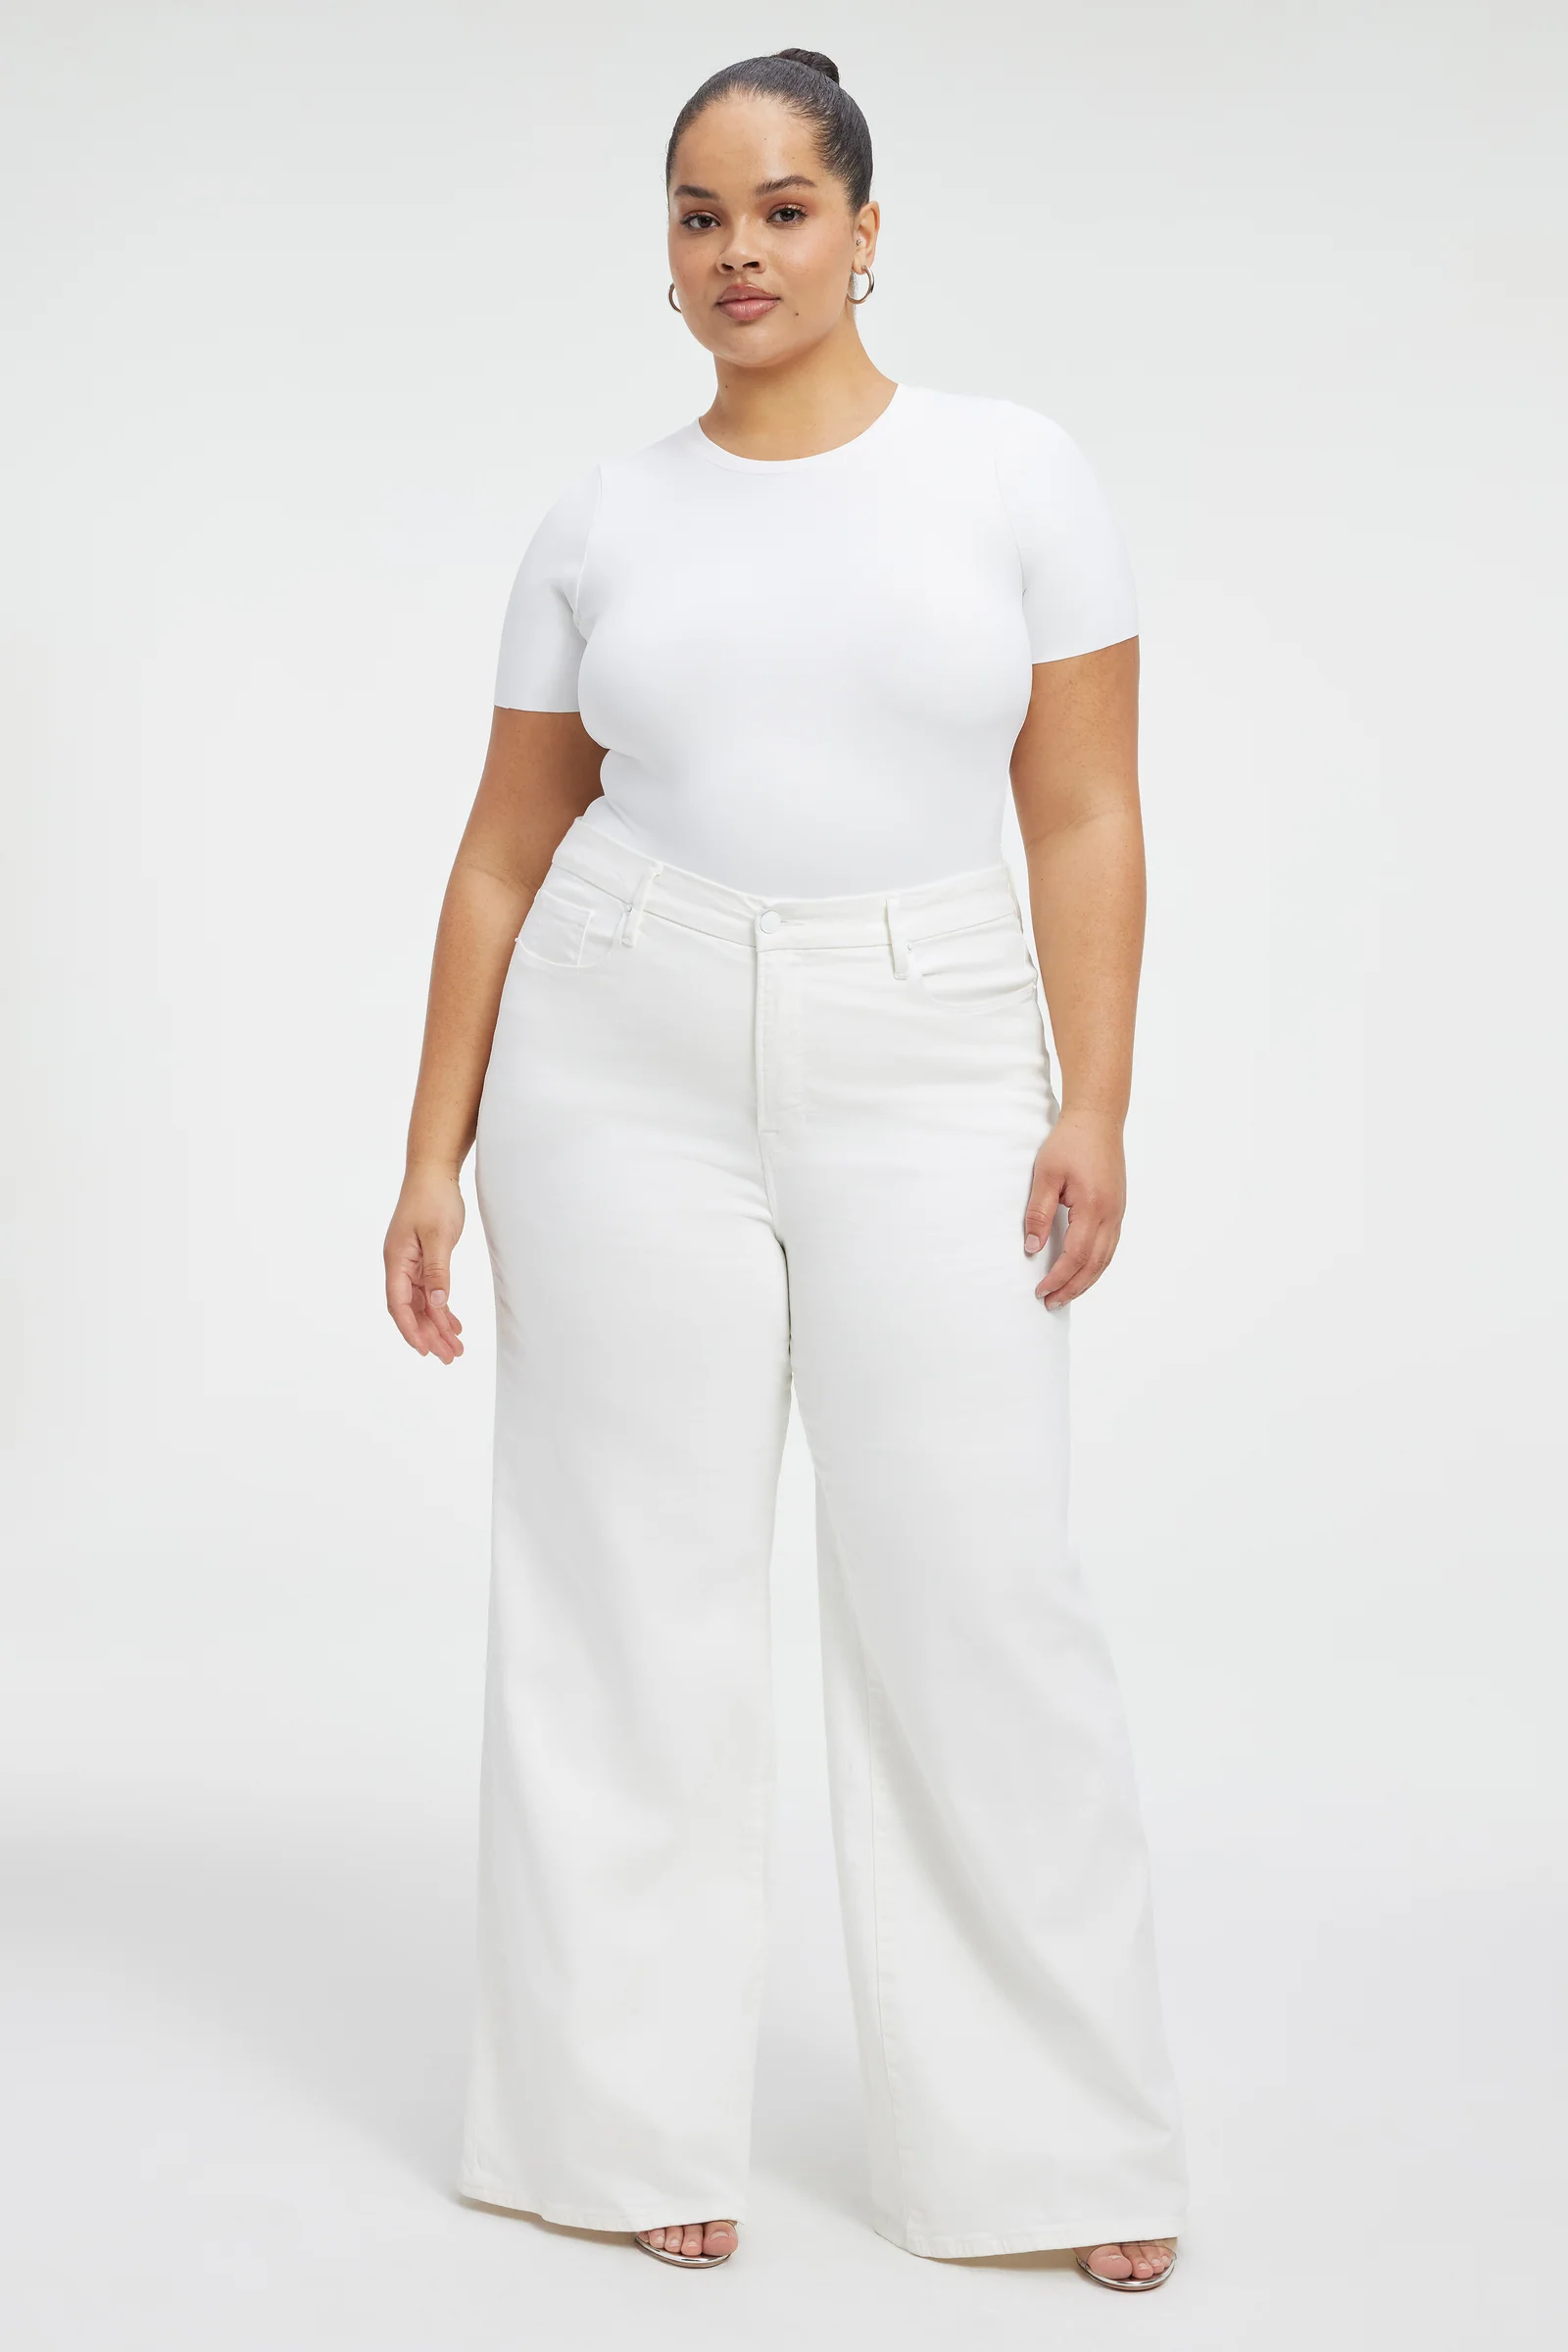 1682614485 good american plus size white jeans 644aa8bc21a26